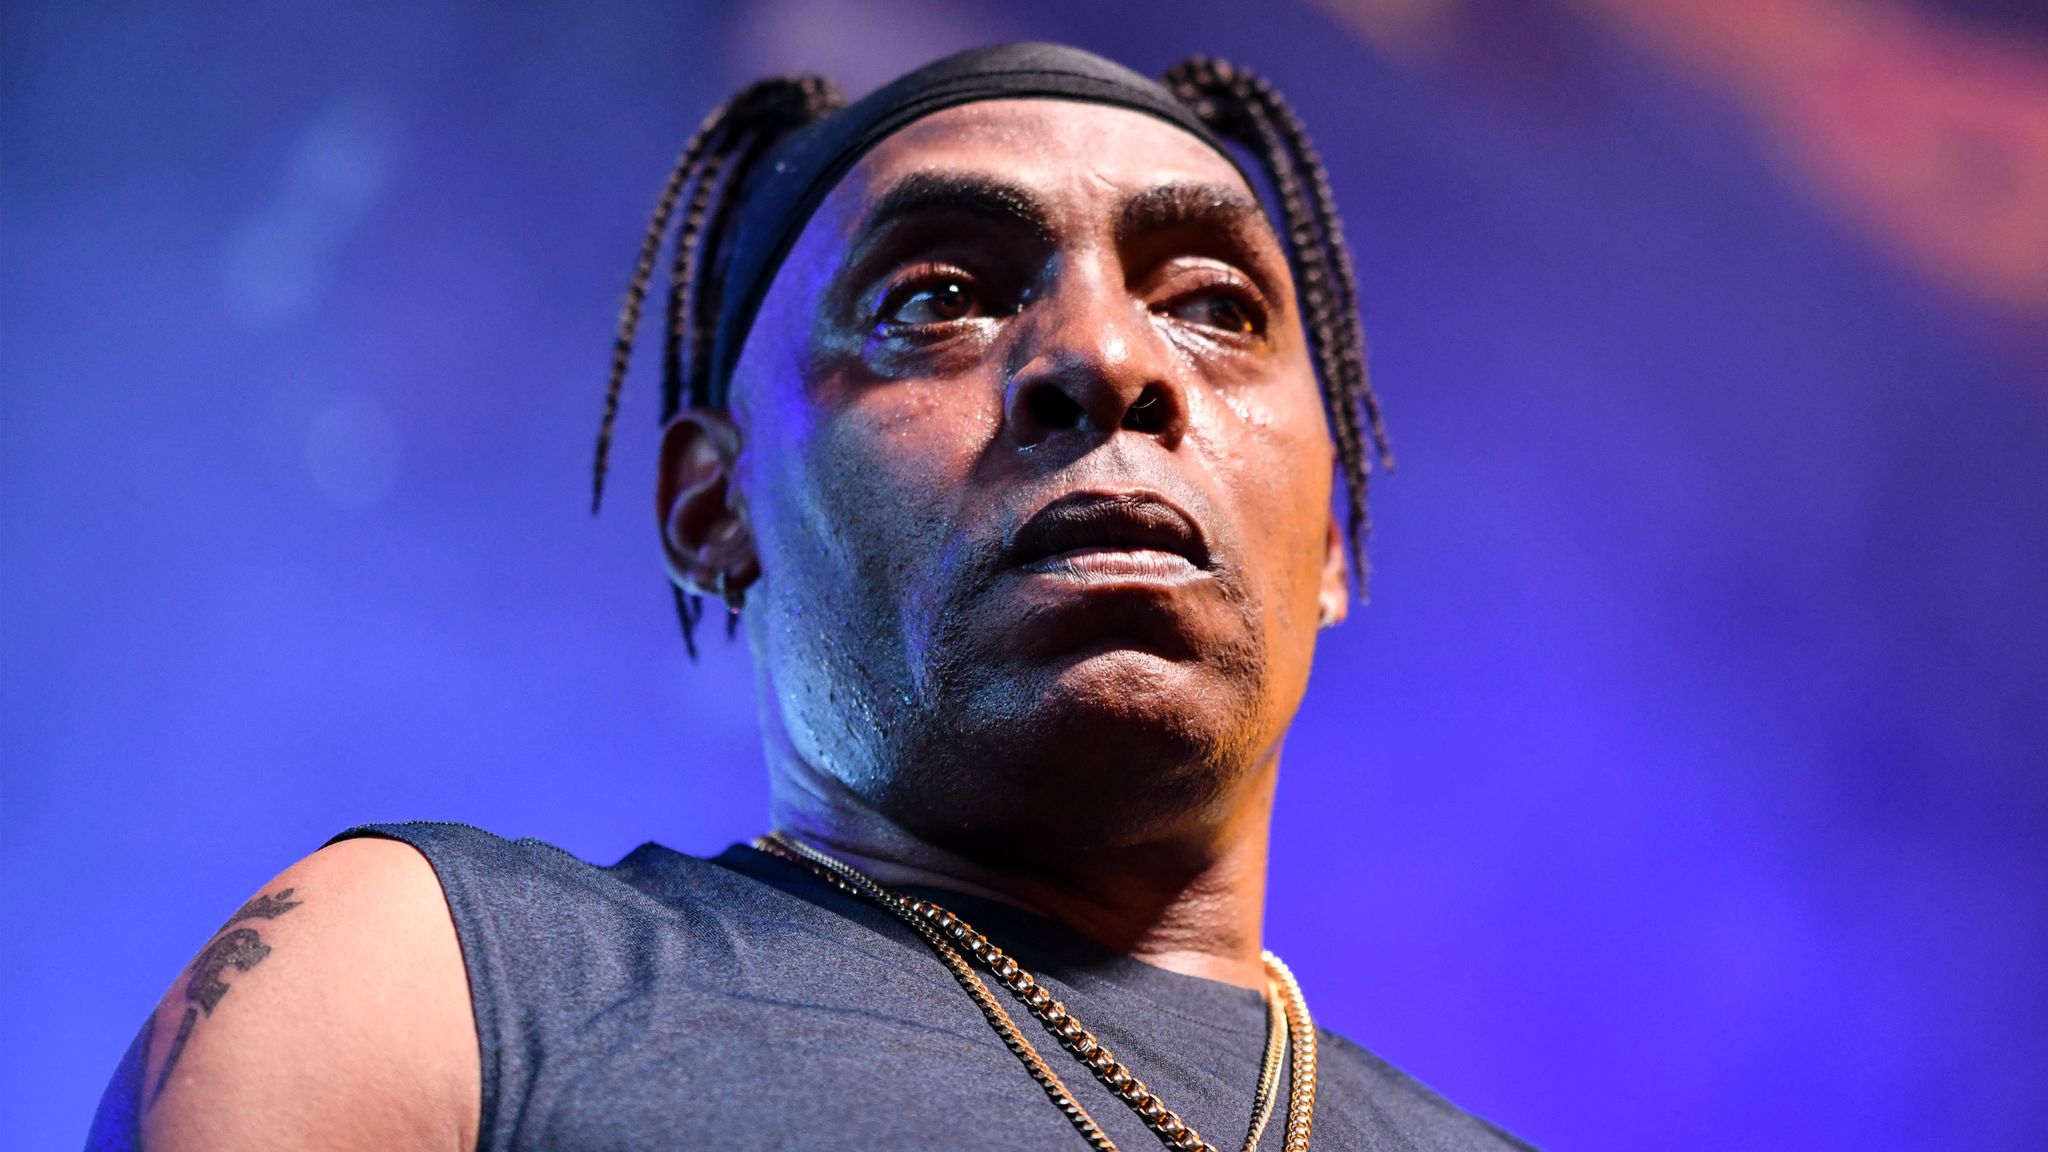 Gangsta's Paradise' rapper Coolio has died after collapsing at friend's  house